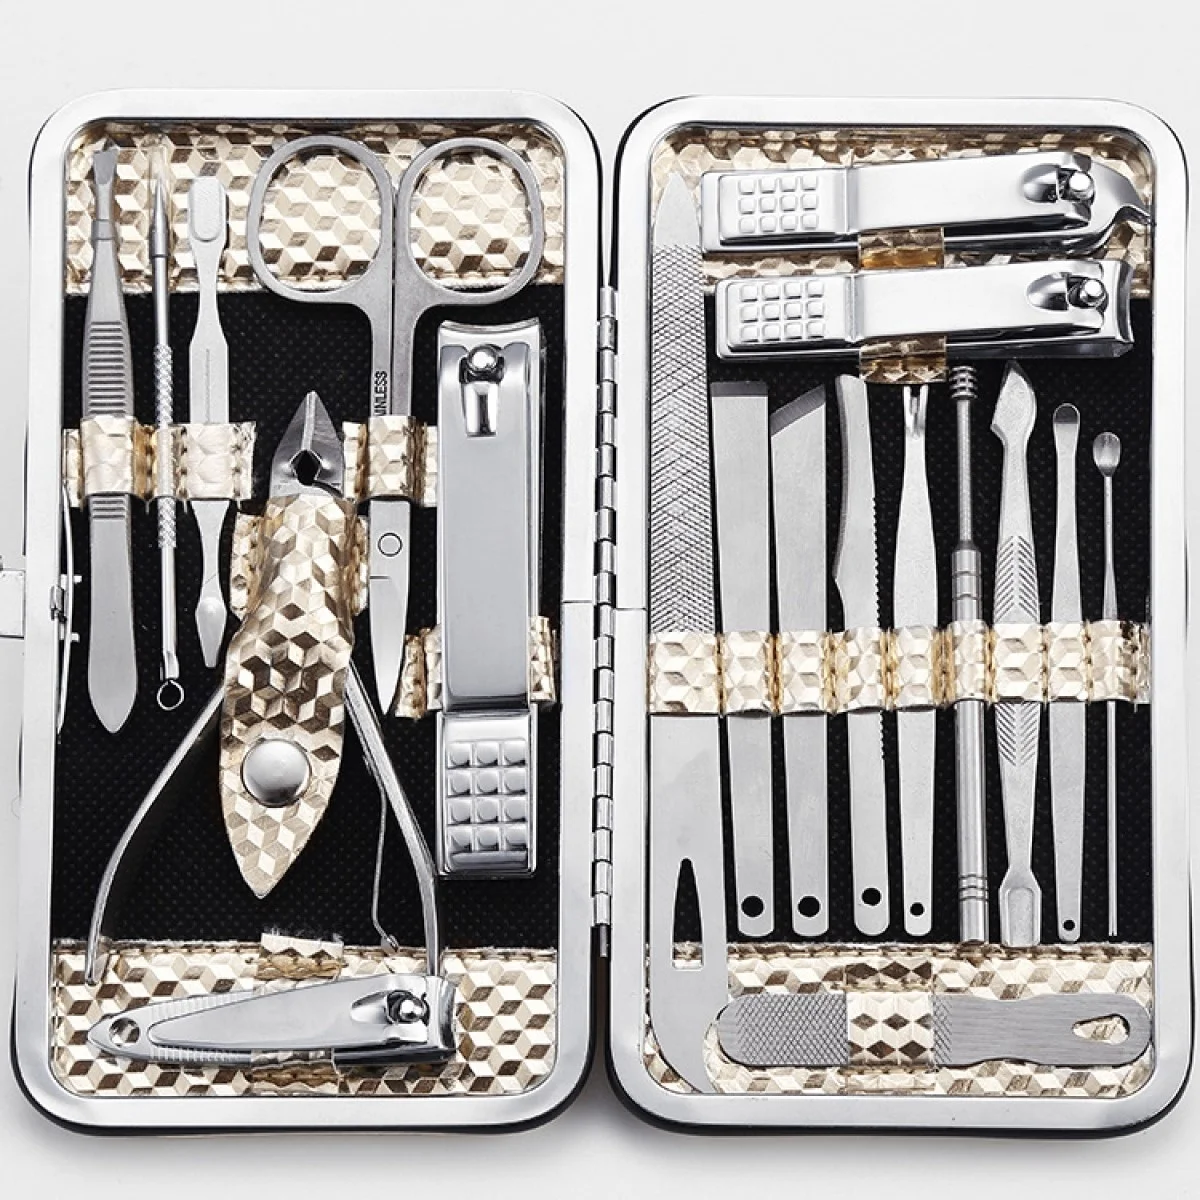 

9/19pc Nail Clipper Professional Grooming Kit Pedicure Kit Nail Cutter Tools With Luxurious Travel Case Manicure Scissors Makeup